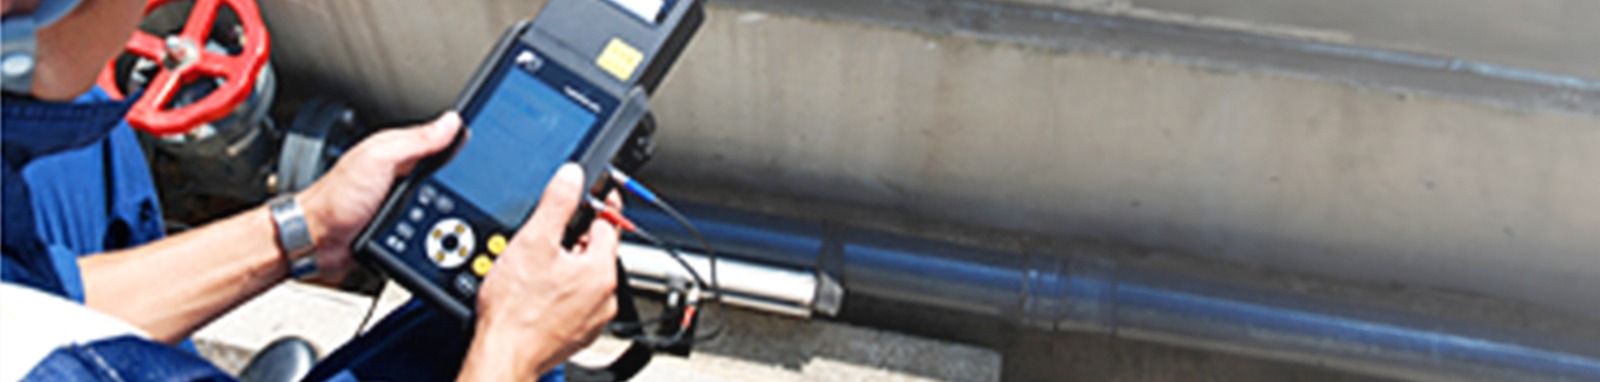 Versatility and mobility with the portable ultrasonic flow meter